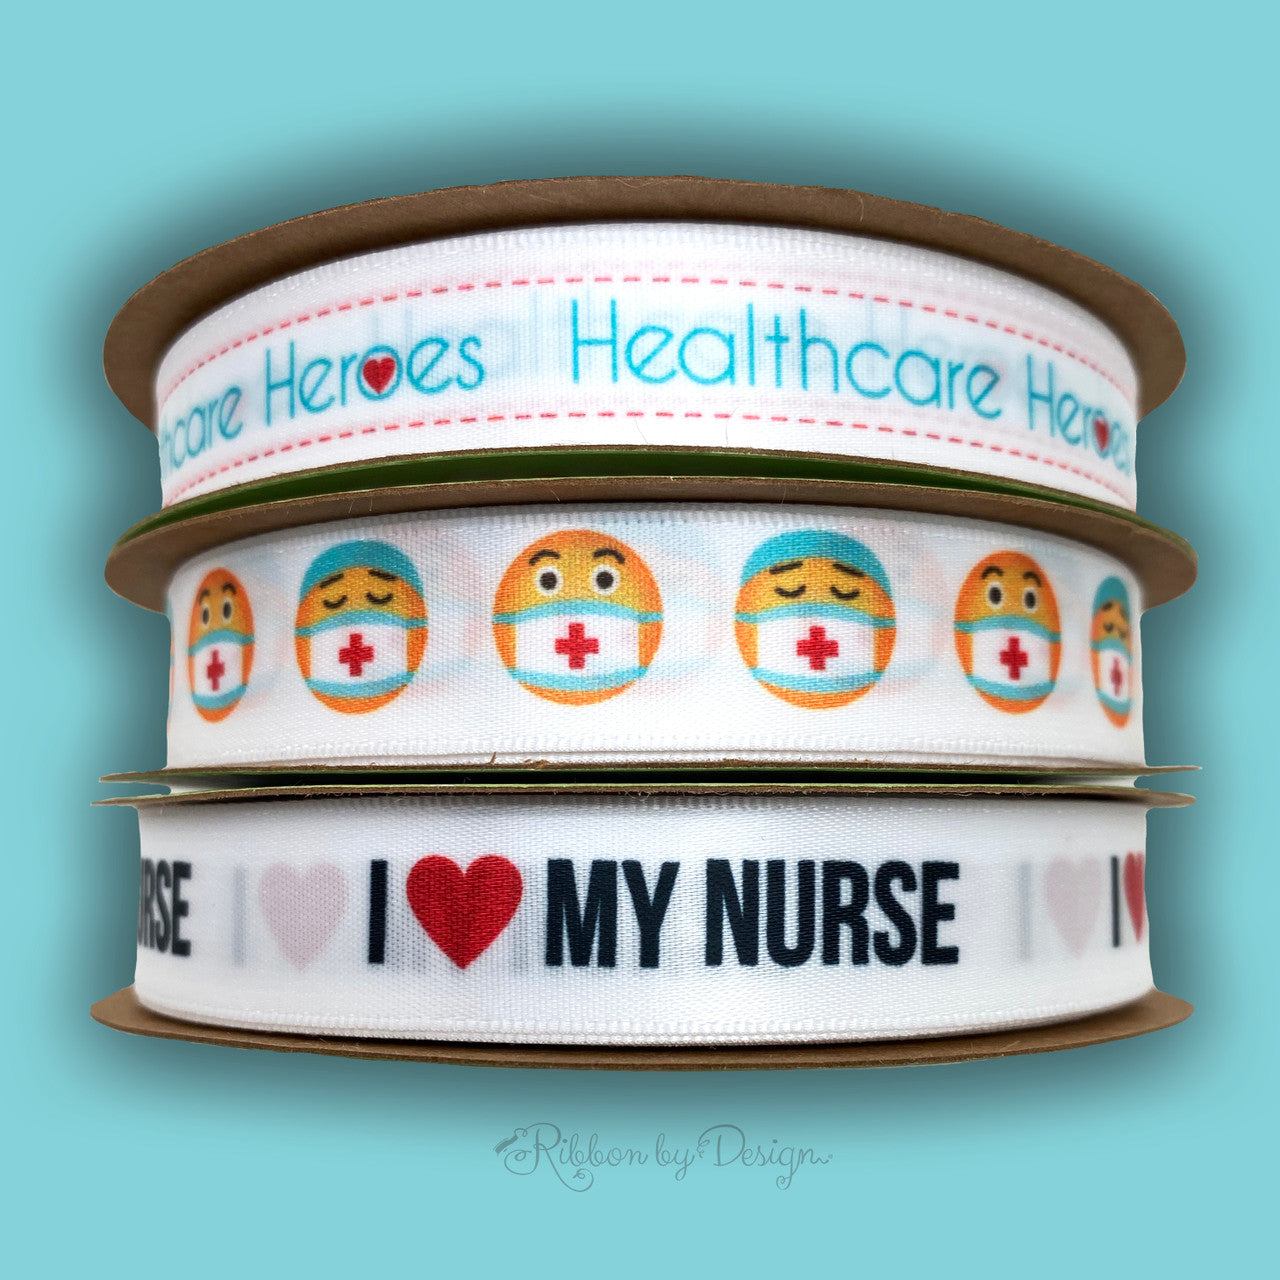 Mix and match our heroes ribbons to celebrate your favorite medical professionals!